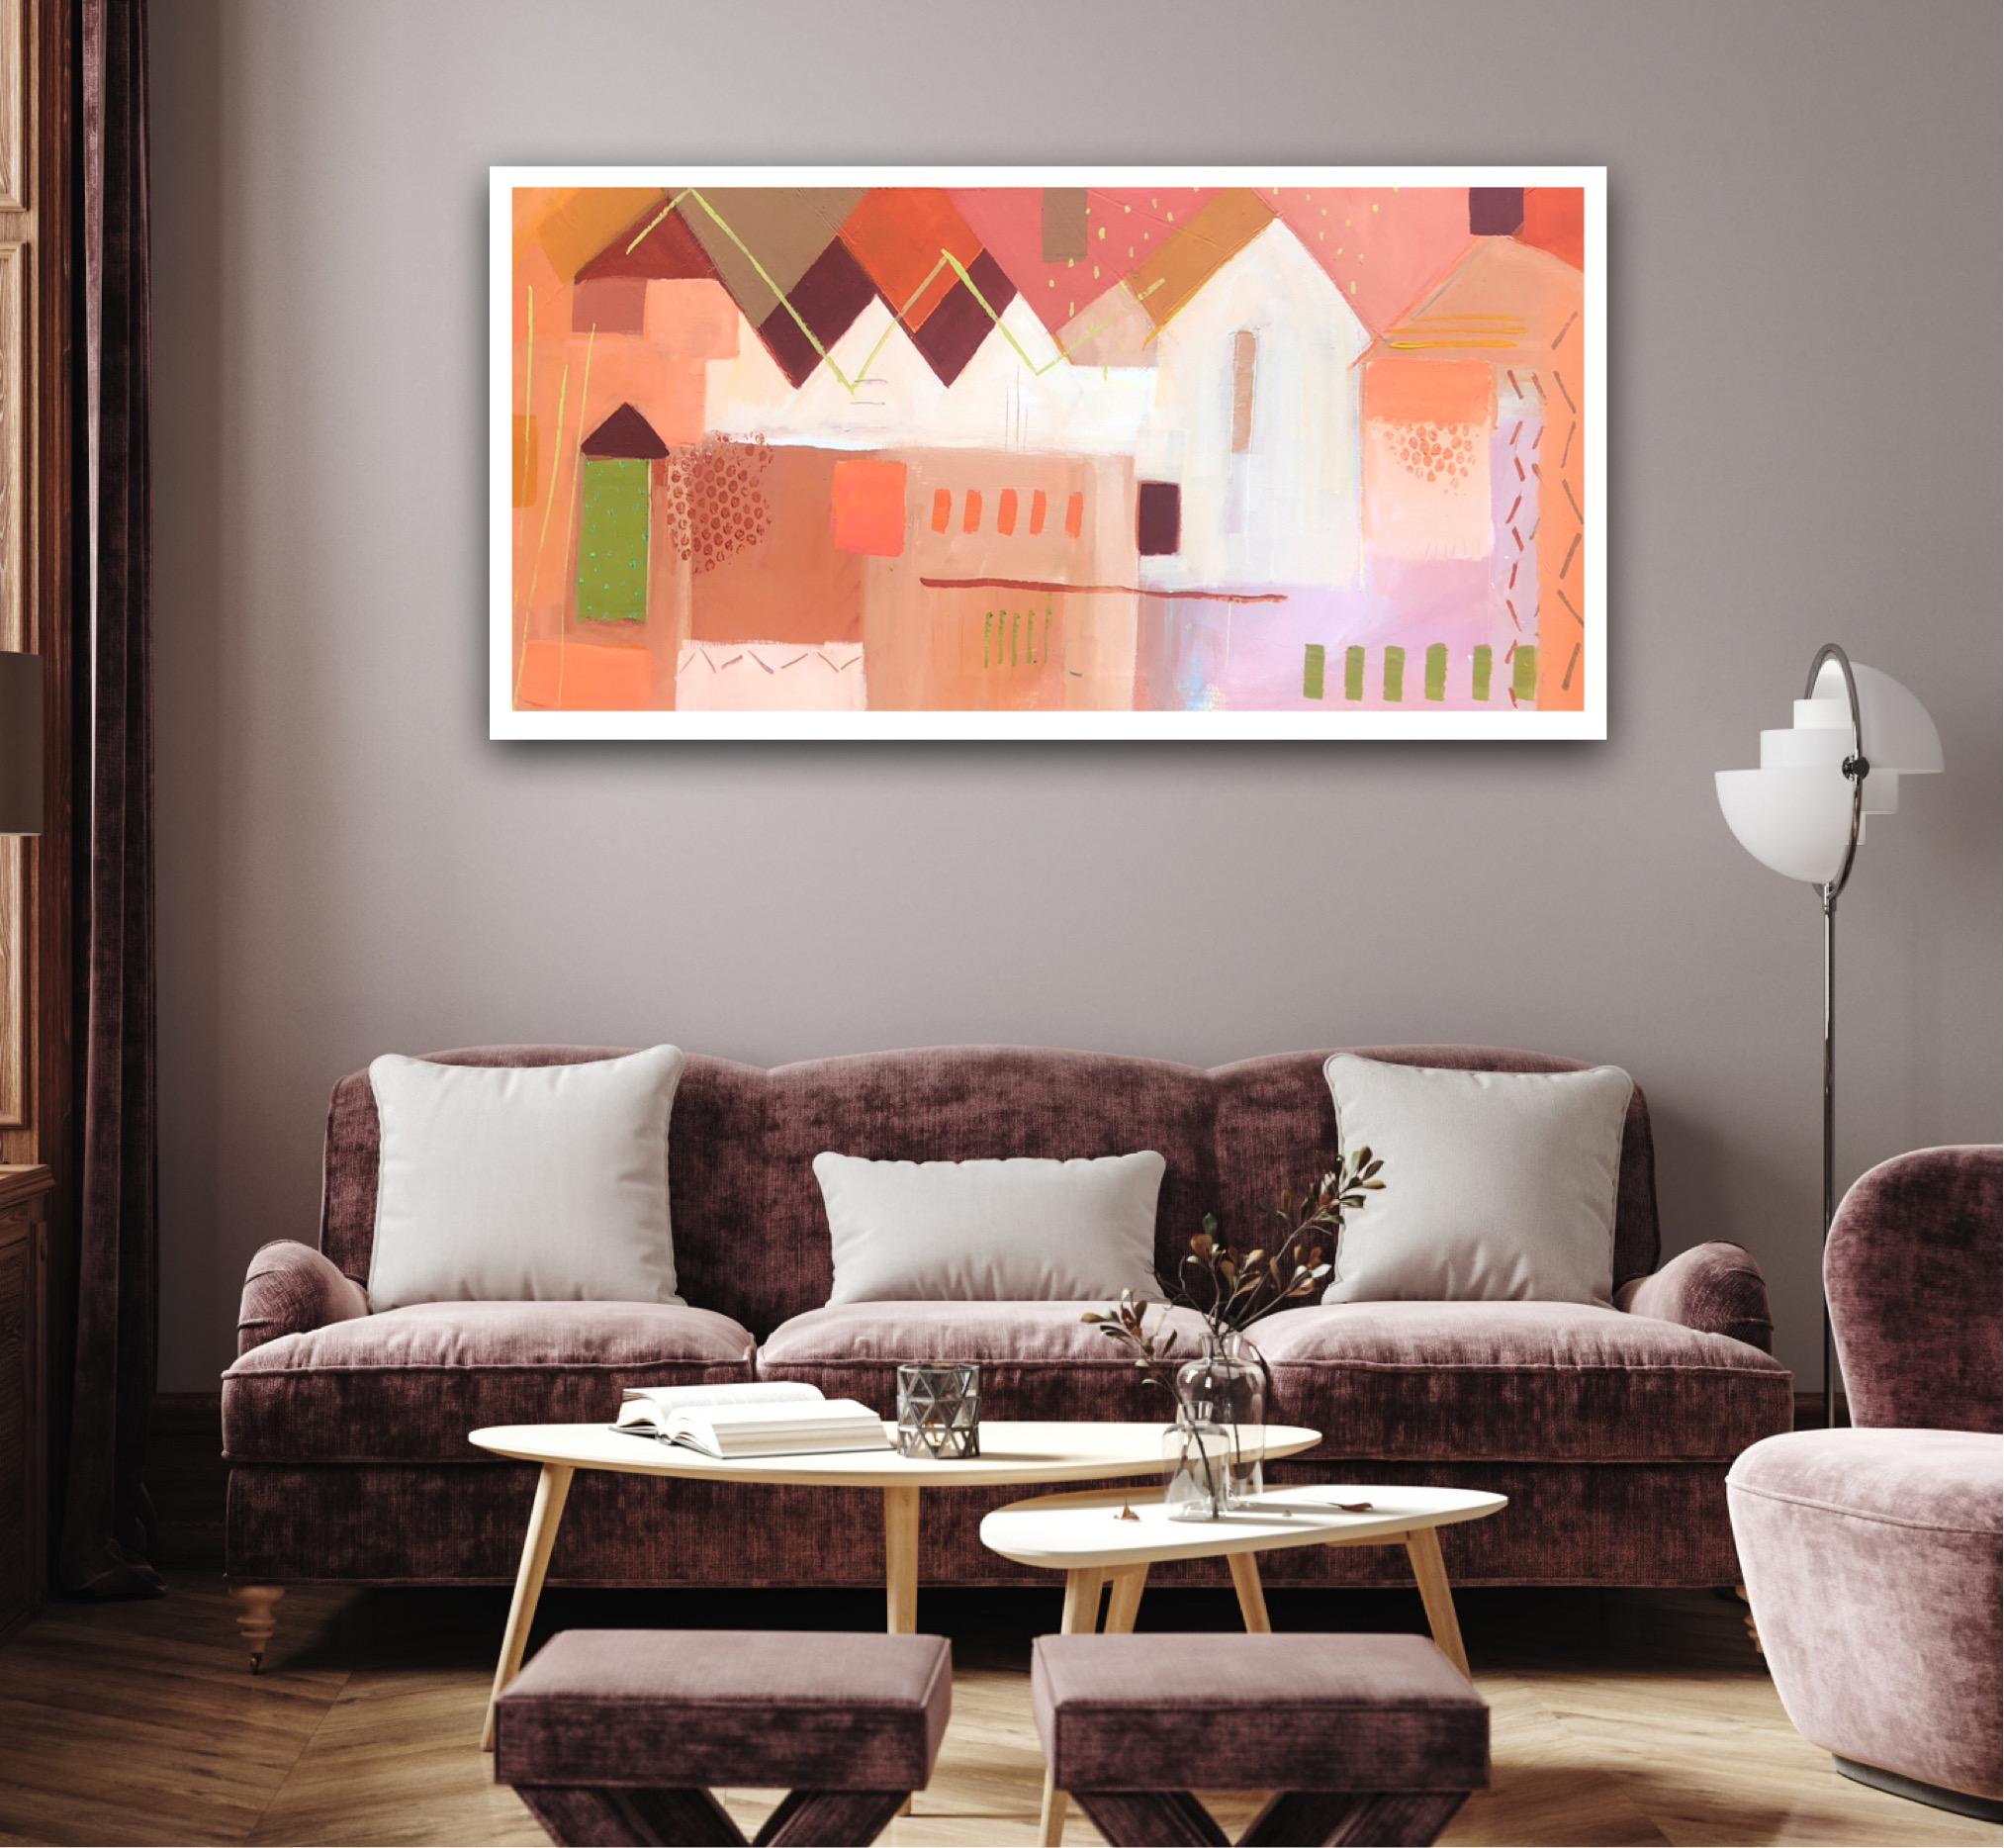 Bryggen Facades 6 by Maggie LaPorte-Banks, Original painting, Abstract Art, Pink For Sale 1